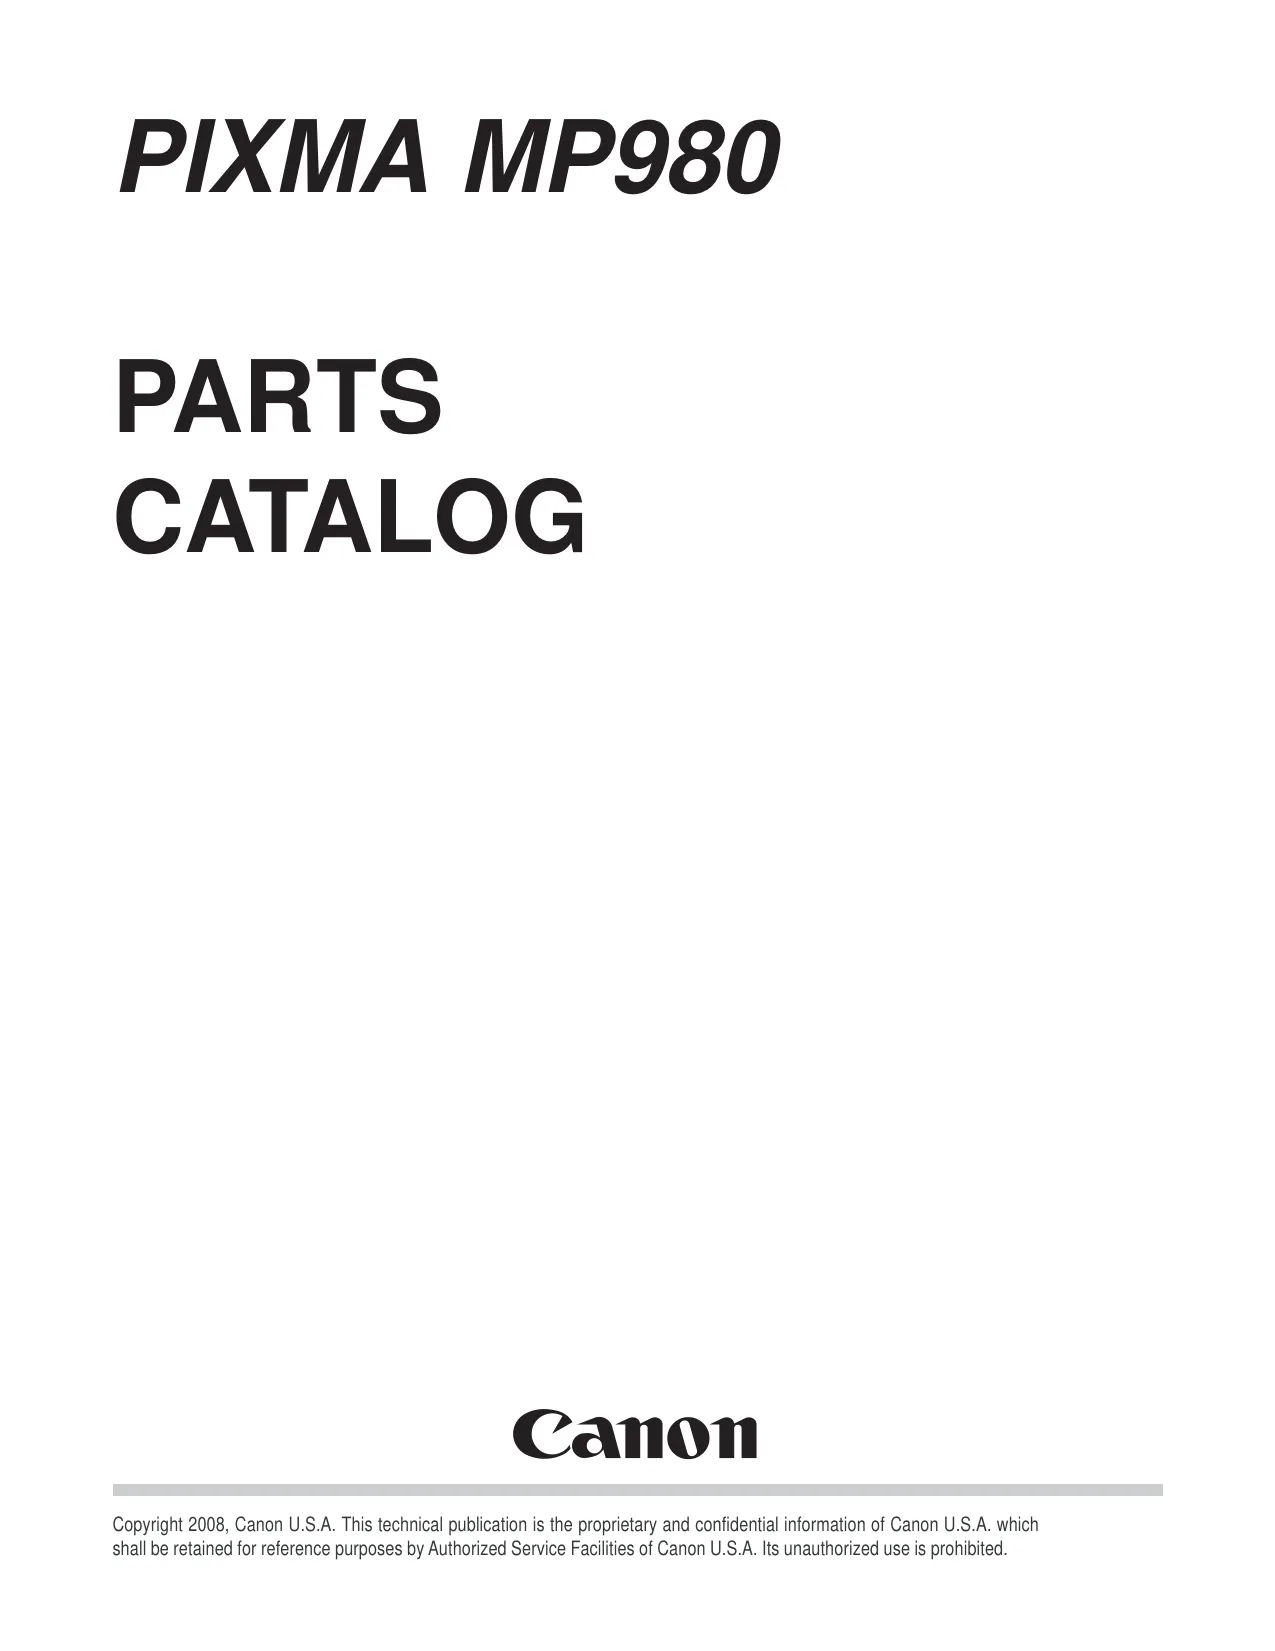 Canon Pixma MP980 multifunction inkjet printer service guide + parts catalog Preview image 1